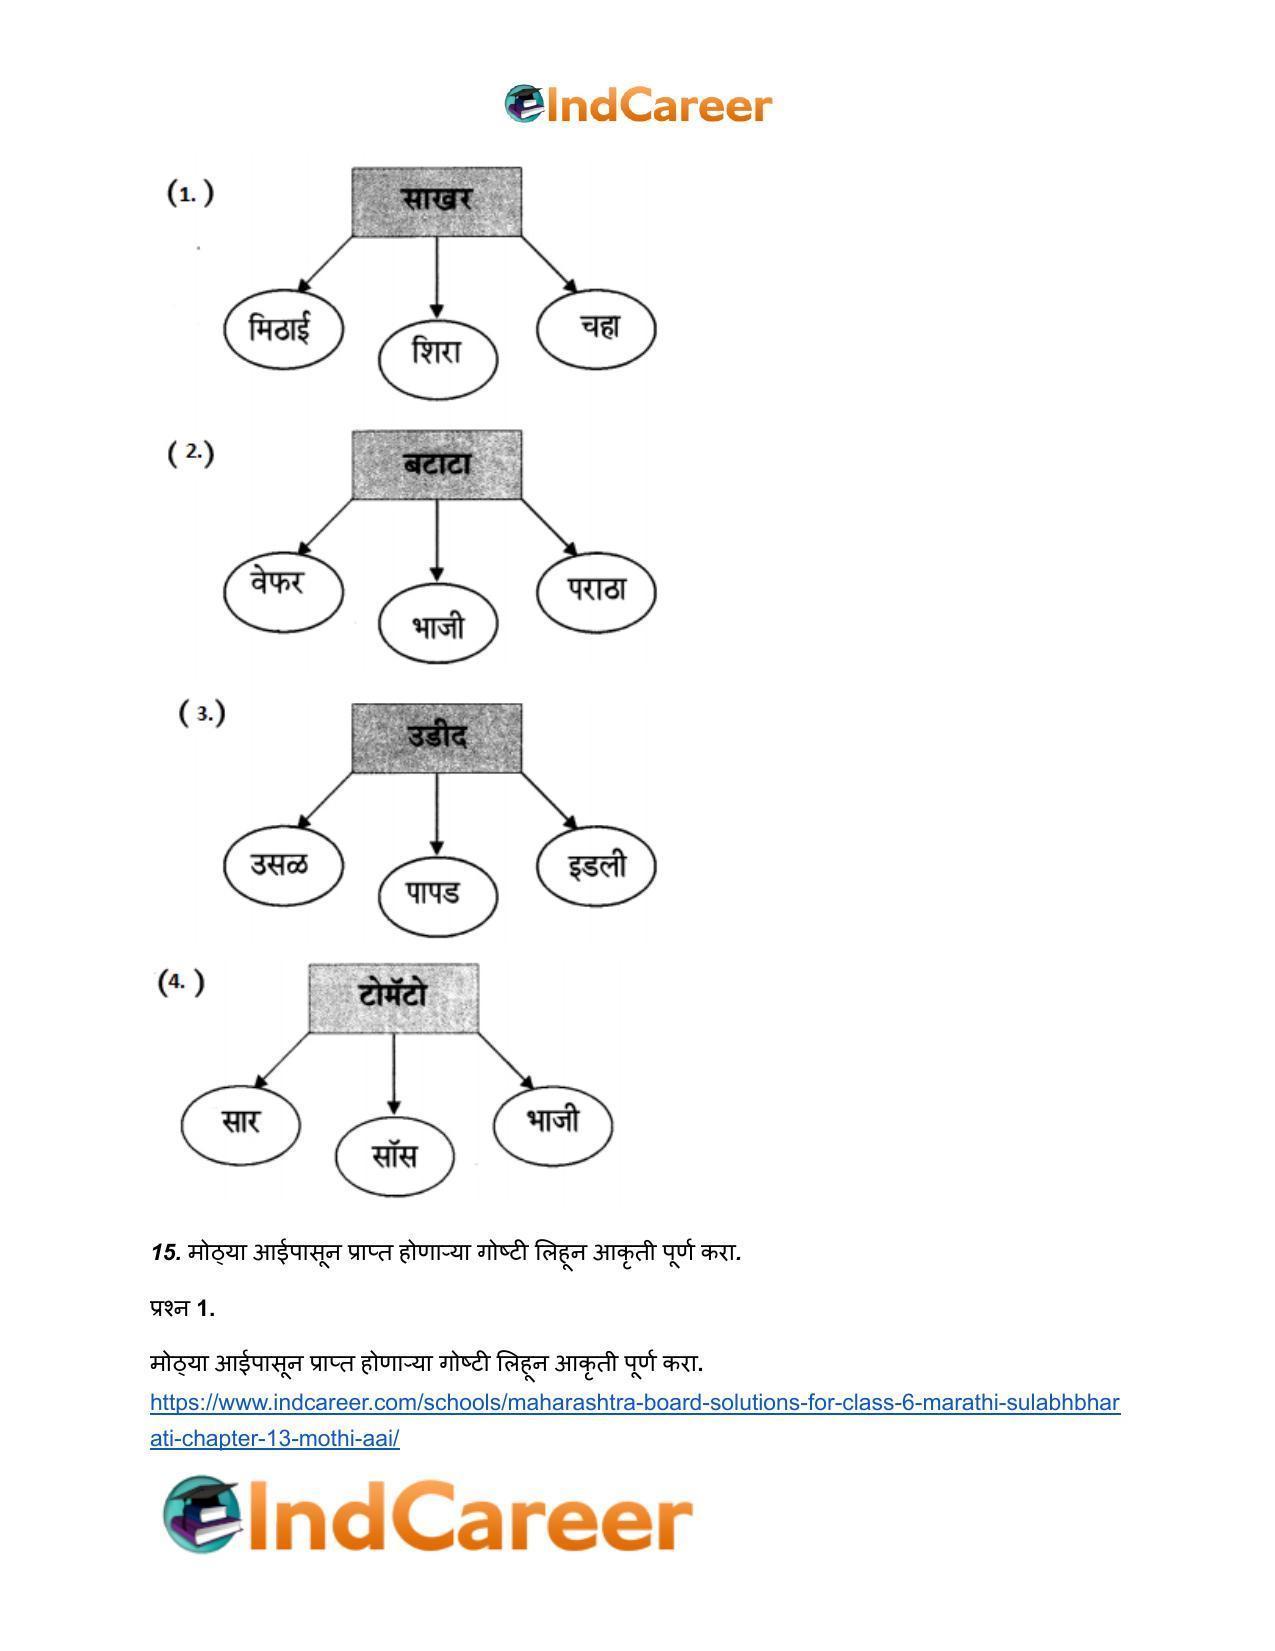 Maharashtra Board Solutions for Class 6- Marathi Sulabhbharati: Chapter 13- मोठी आई - Page 10